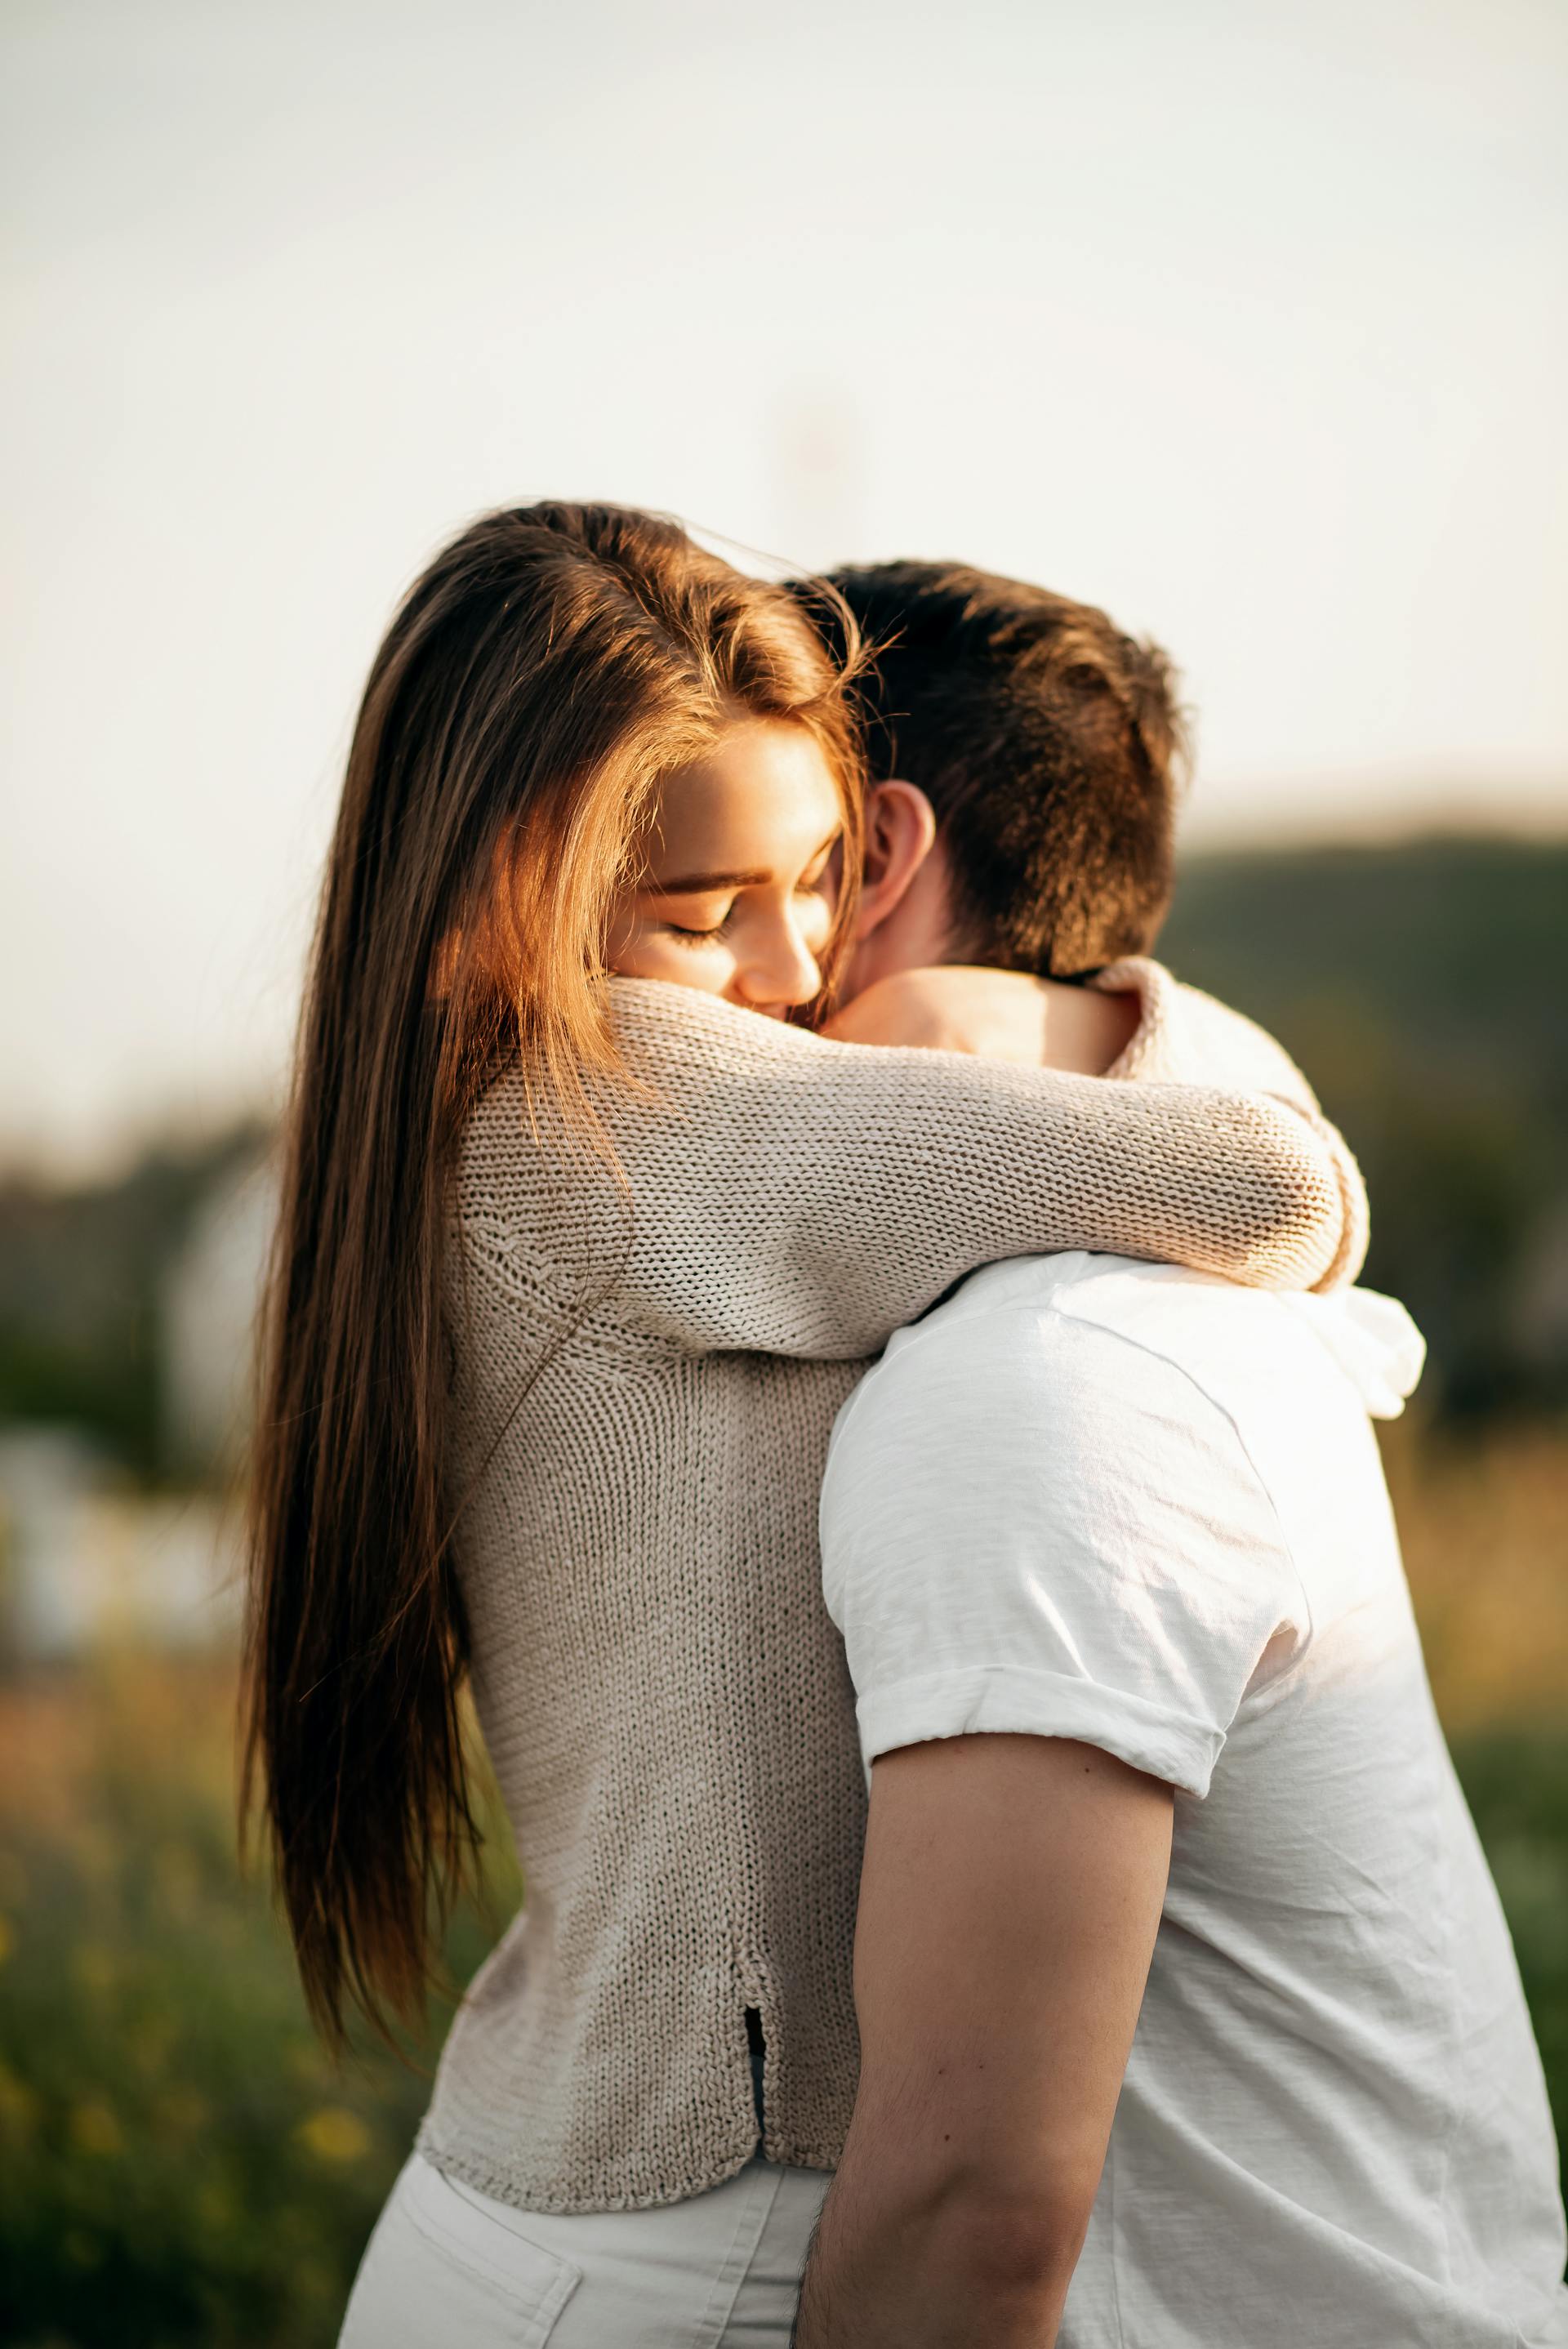 A young couple hugging | Source: Pexels